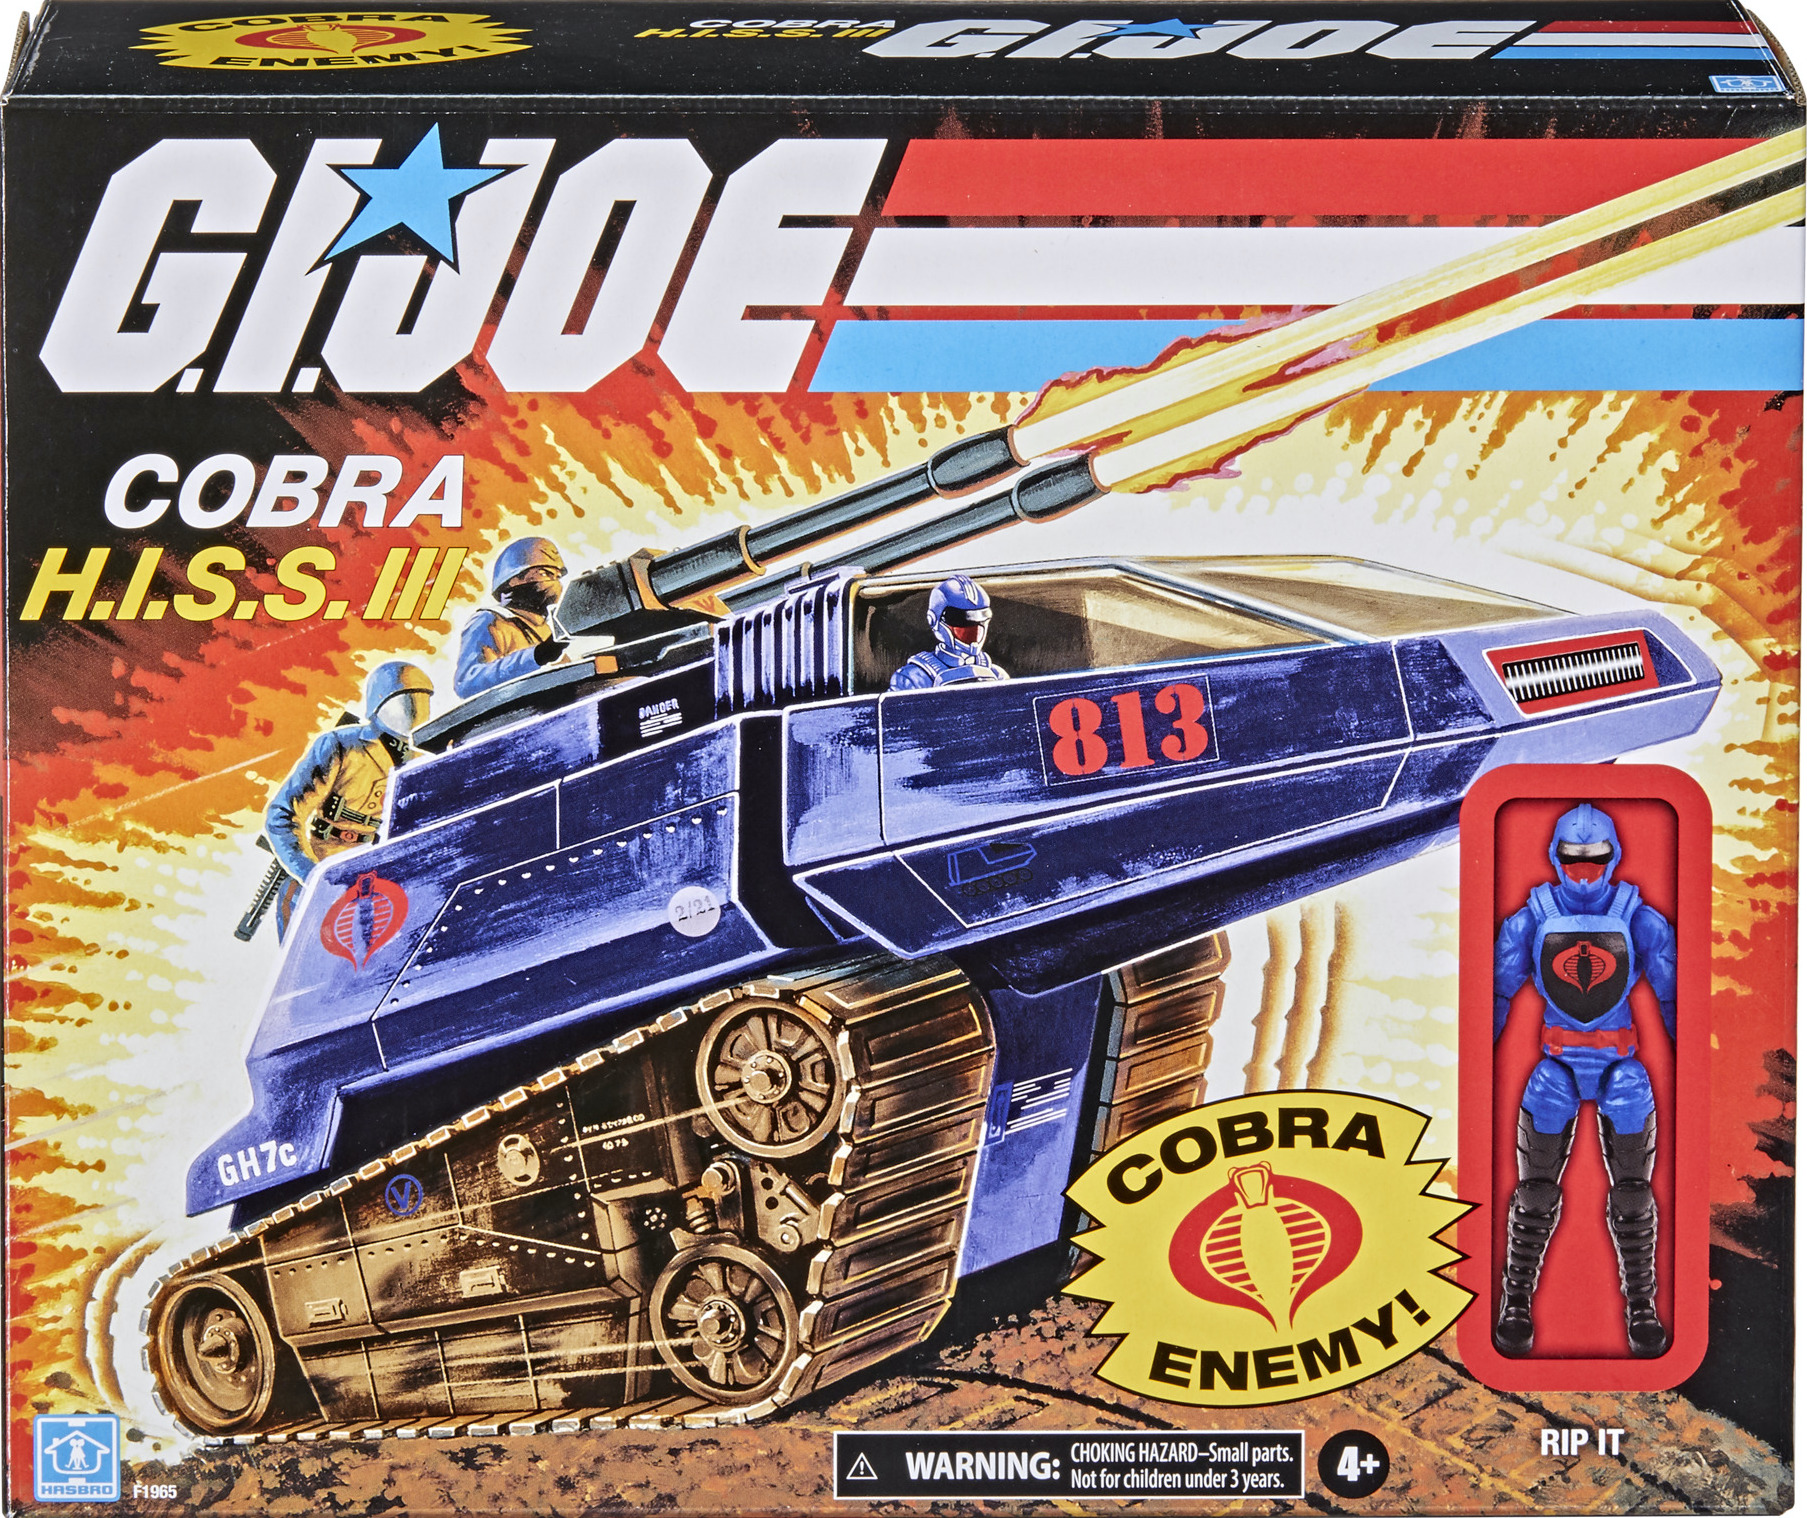 Hasbro G.I Joe Cobra Hiss Tank with 3.75 inch Driver Action Figure for sale online